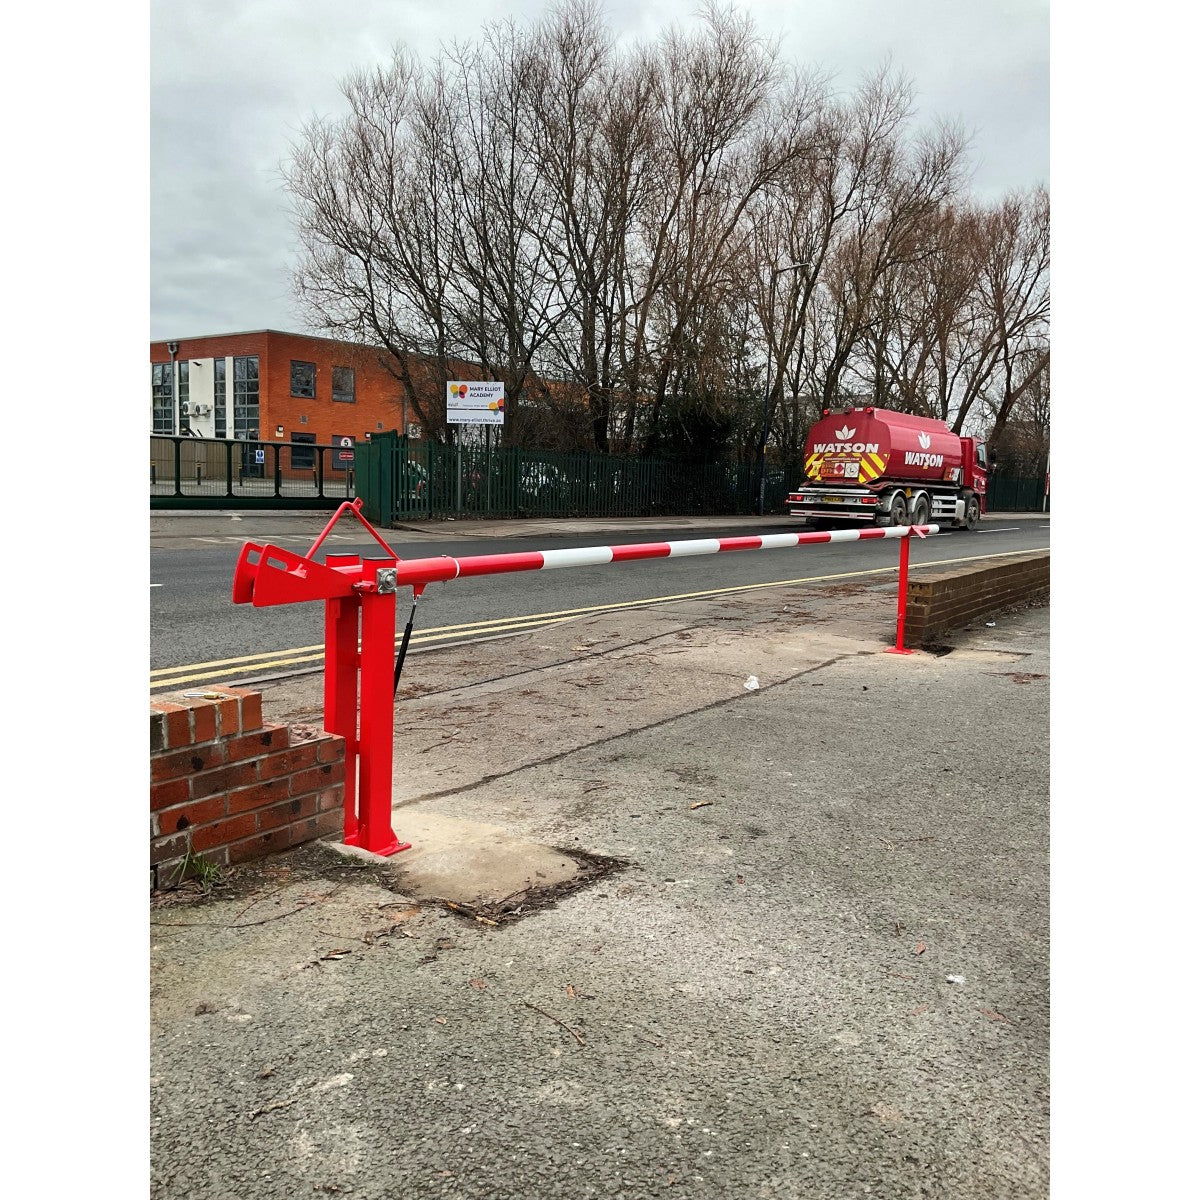 EasyAccess Manual Arm Barrier - 2-8 Metres: Lift and Secure